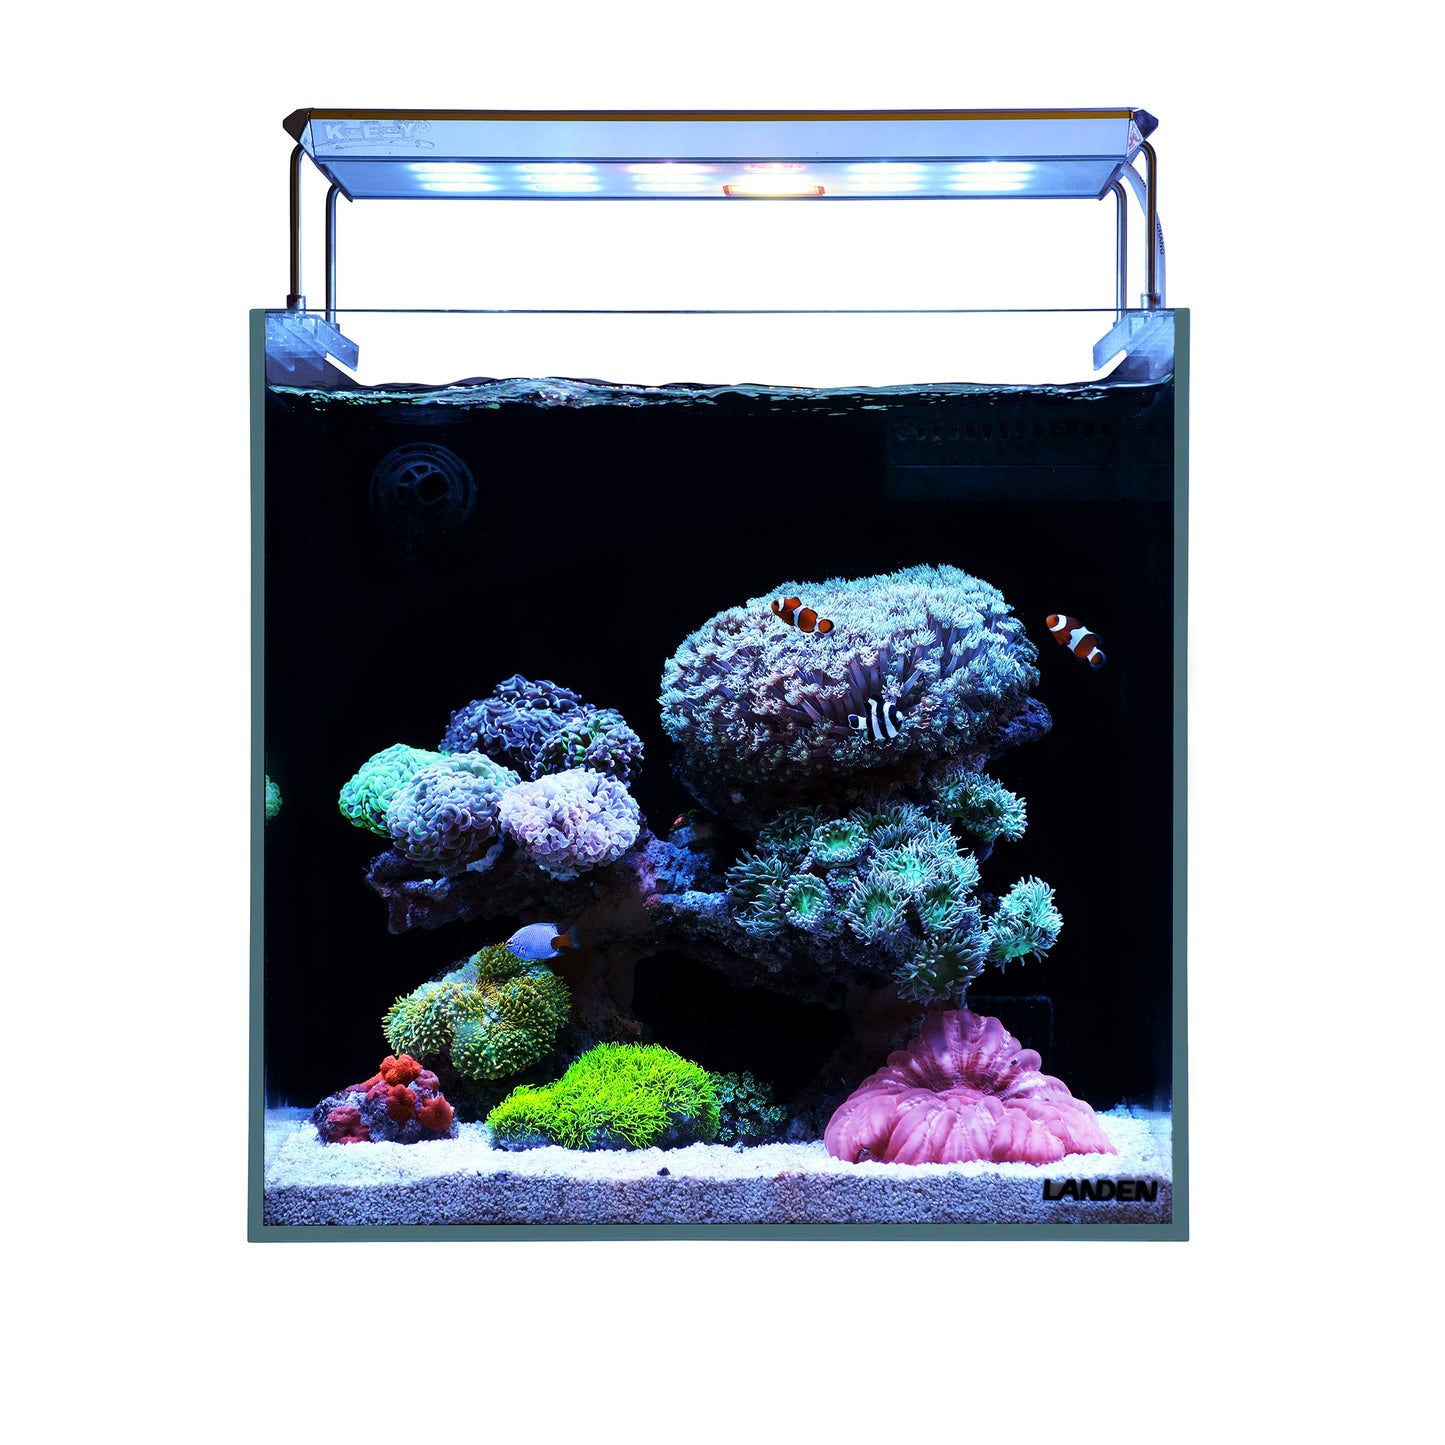 Landen 35C 7.2 Gallon Ultra Clear All Glass Rimless Low Iron Aquarium Tank with Rear Filtration Chamber(Return Pump Included)for Salt and Fresh Water.13.8''Wx13.8''Dx13.8''H in(35x35x35cm)